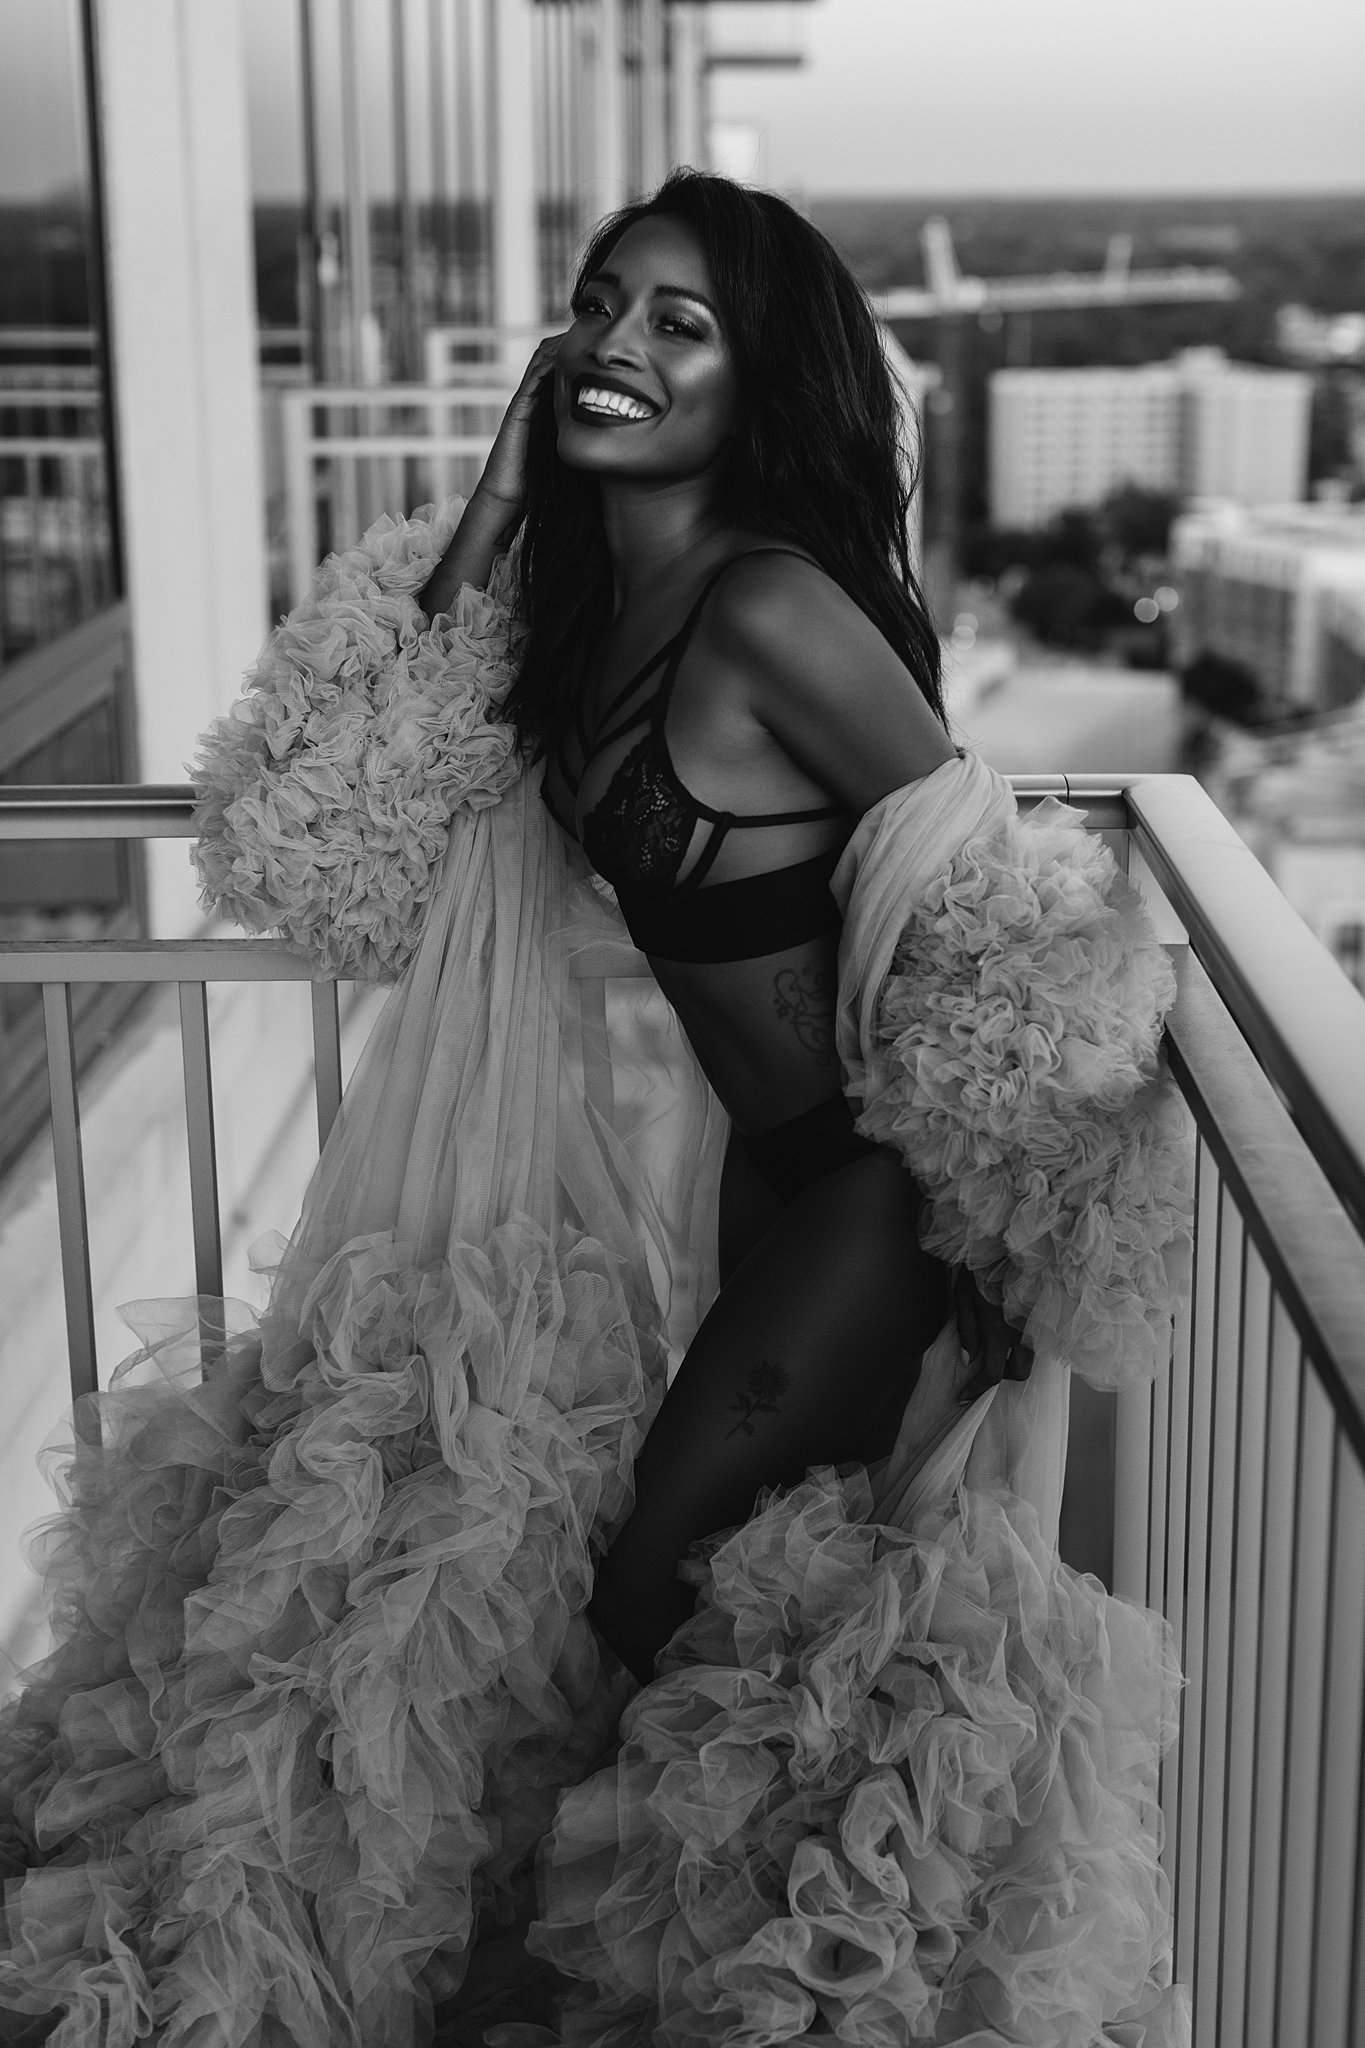 Woman stands on a balcony wearing black lingerie and velour gown med aesthetics miami